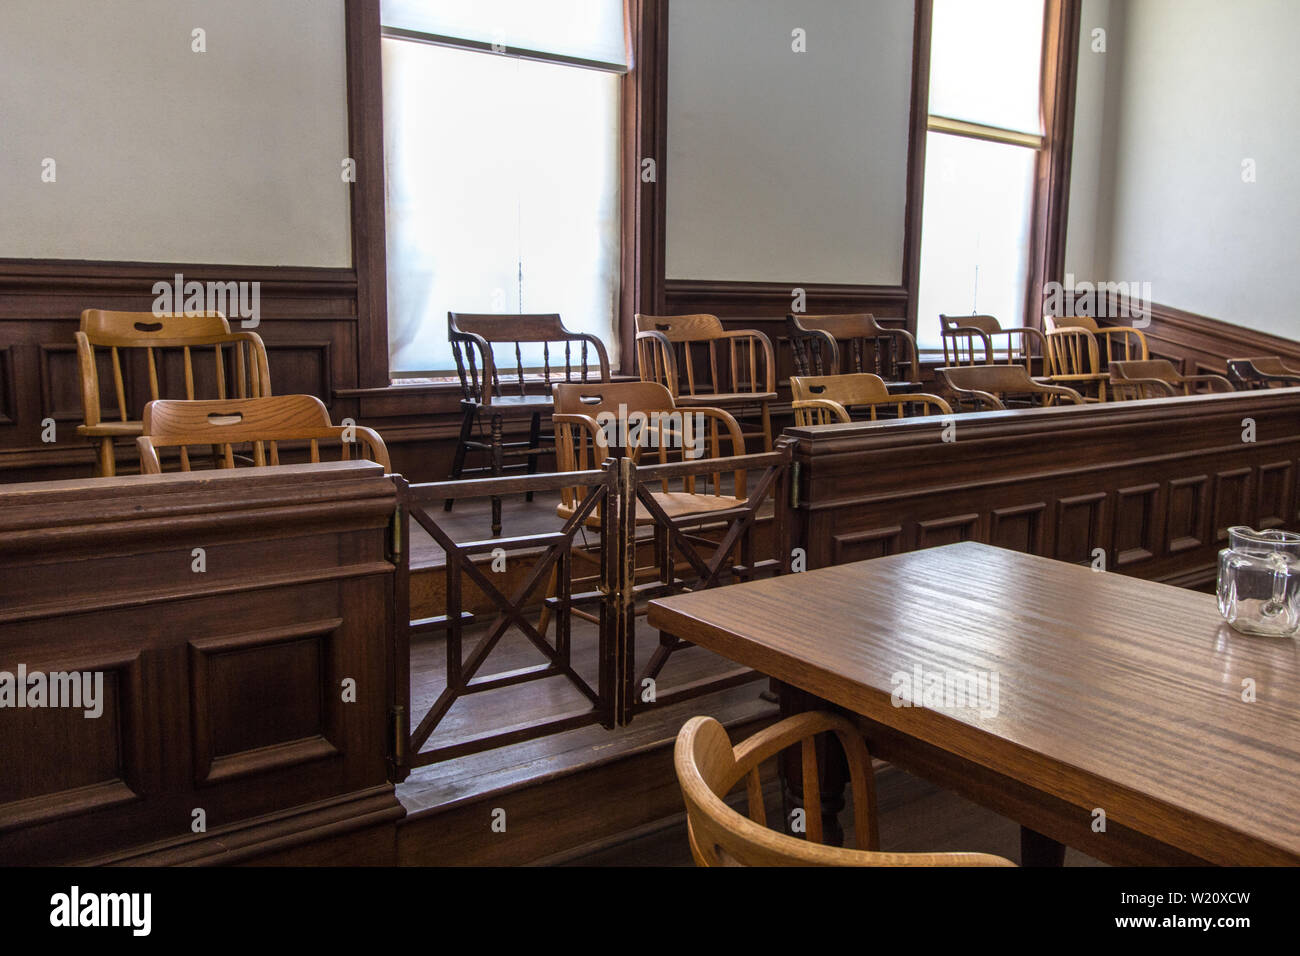 Juror Box. Jury box in courtroom at small rural county courthouse. Stock Photo